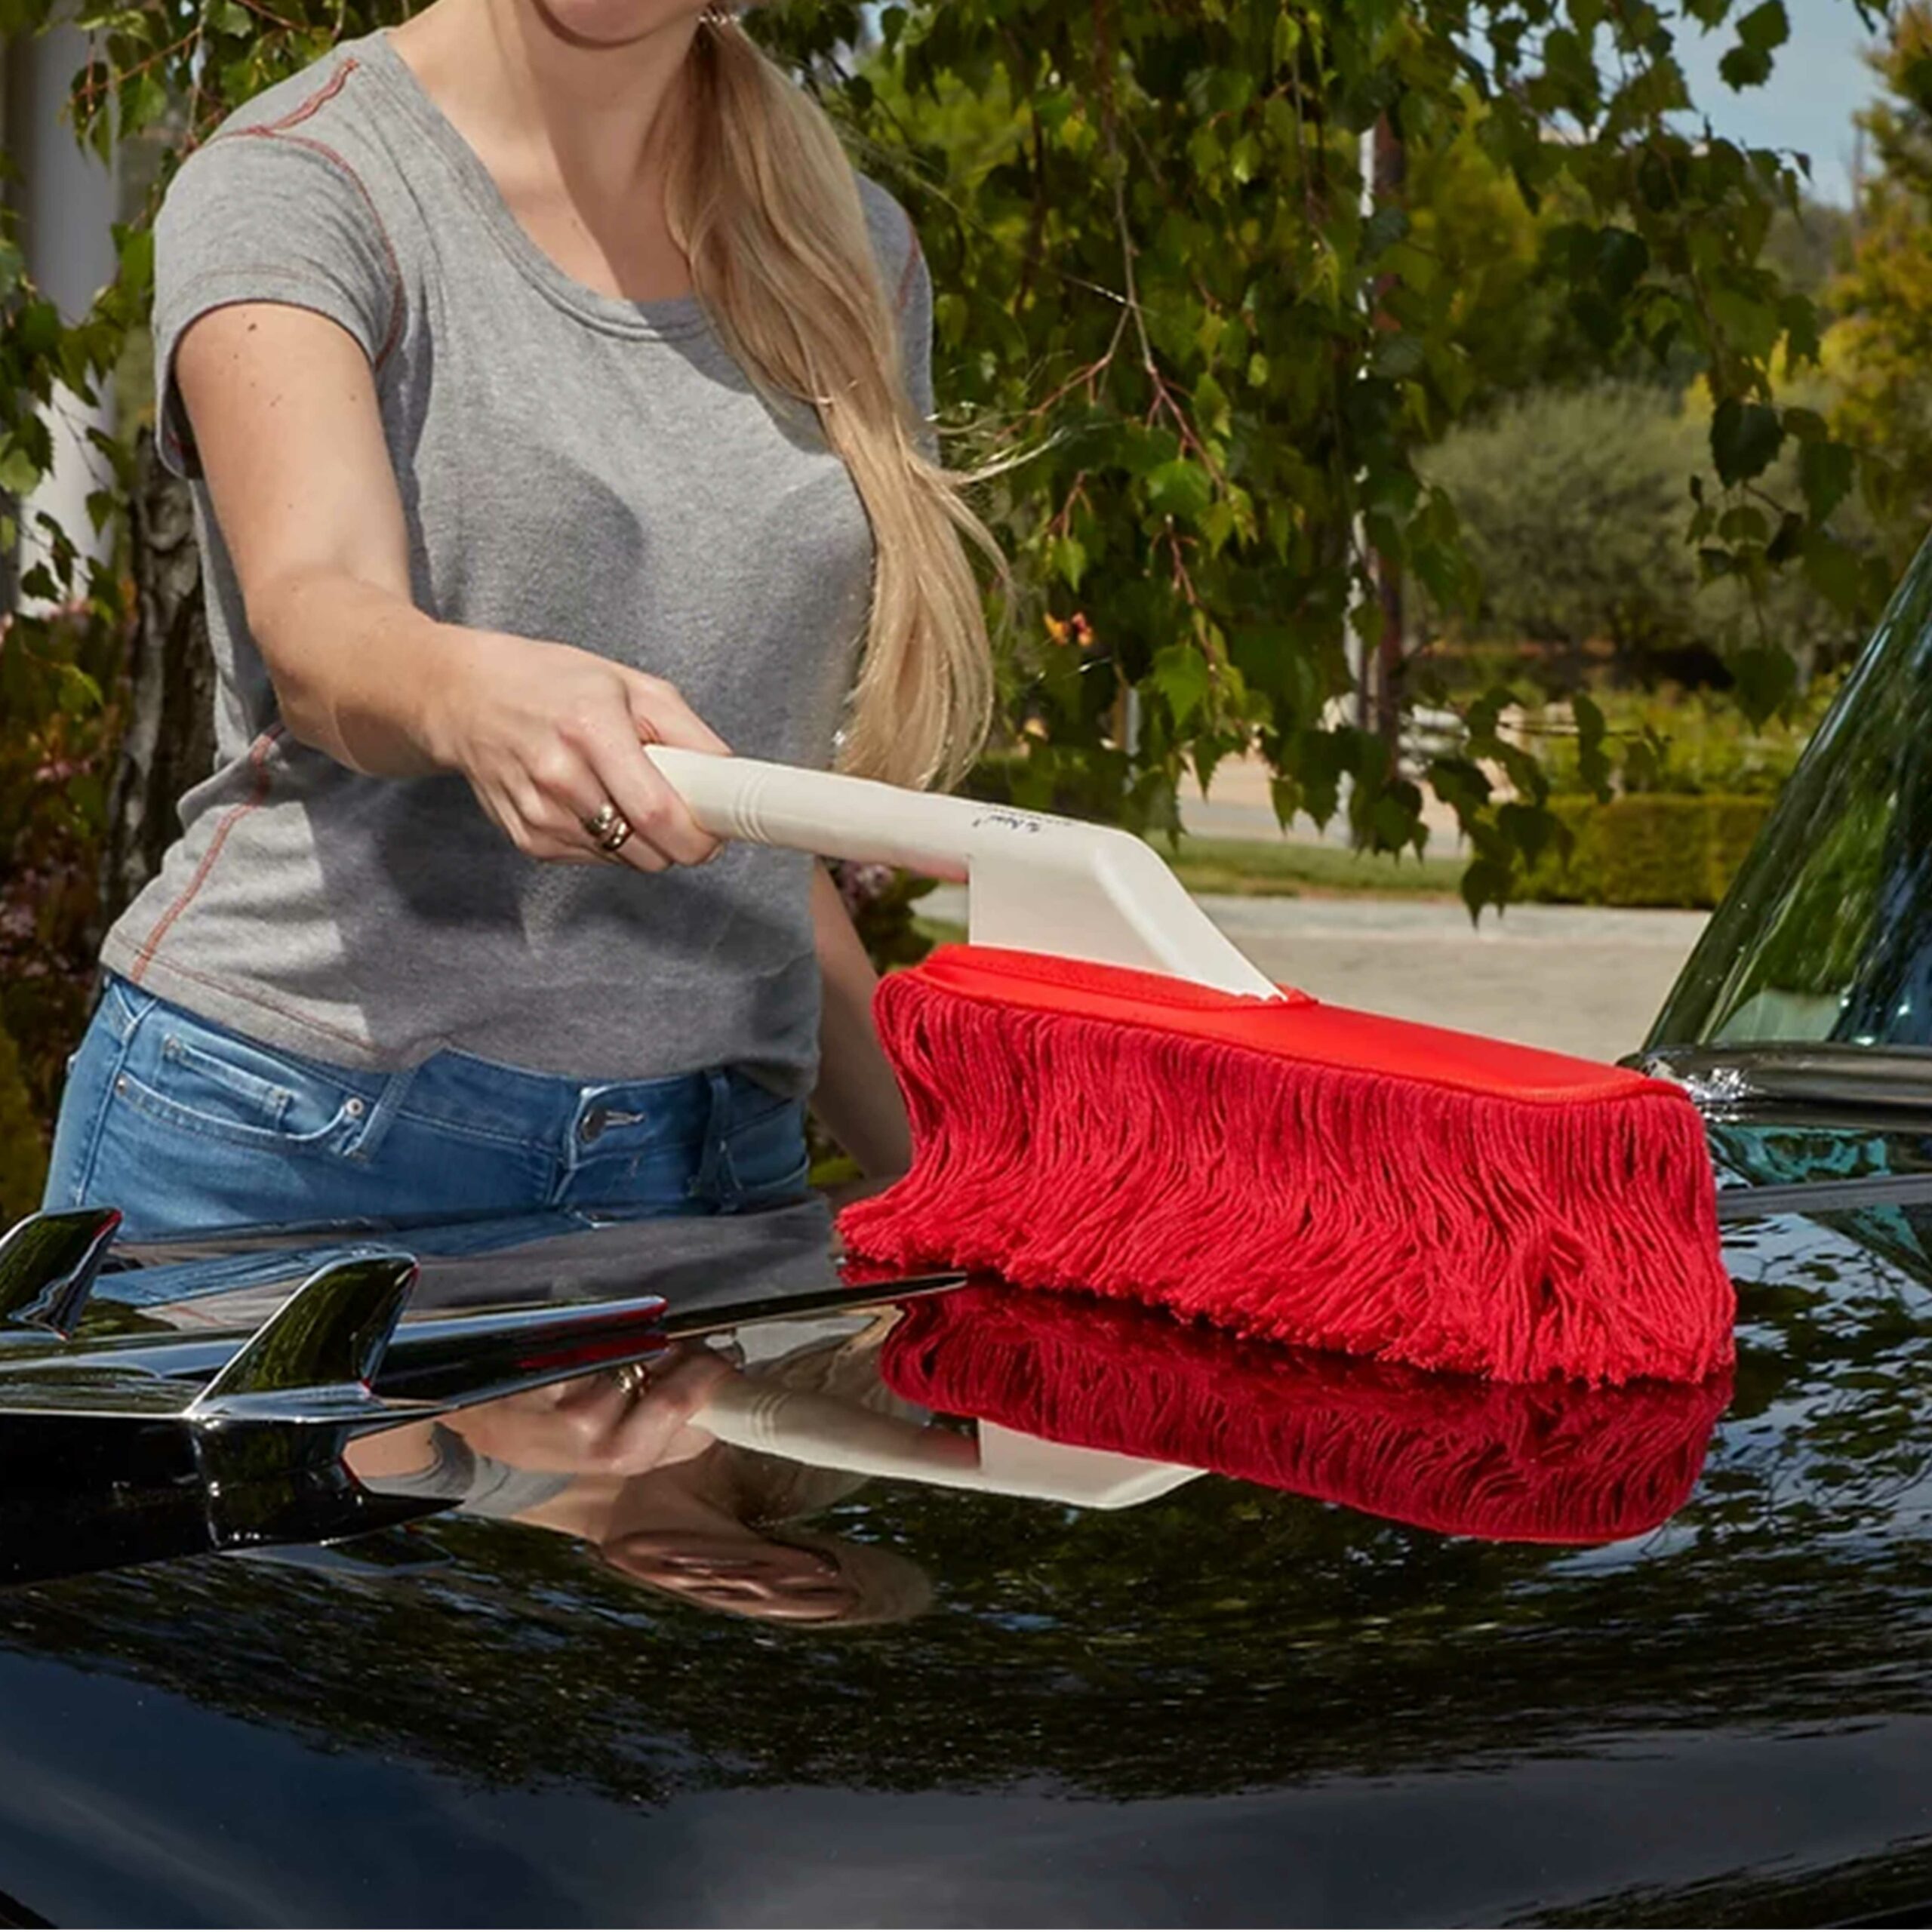 CAR DUSTER #6790   is your #1 source for Auto Dealer  Supplies